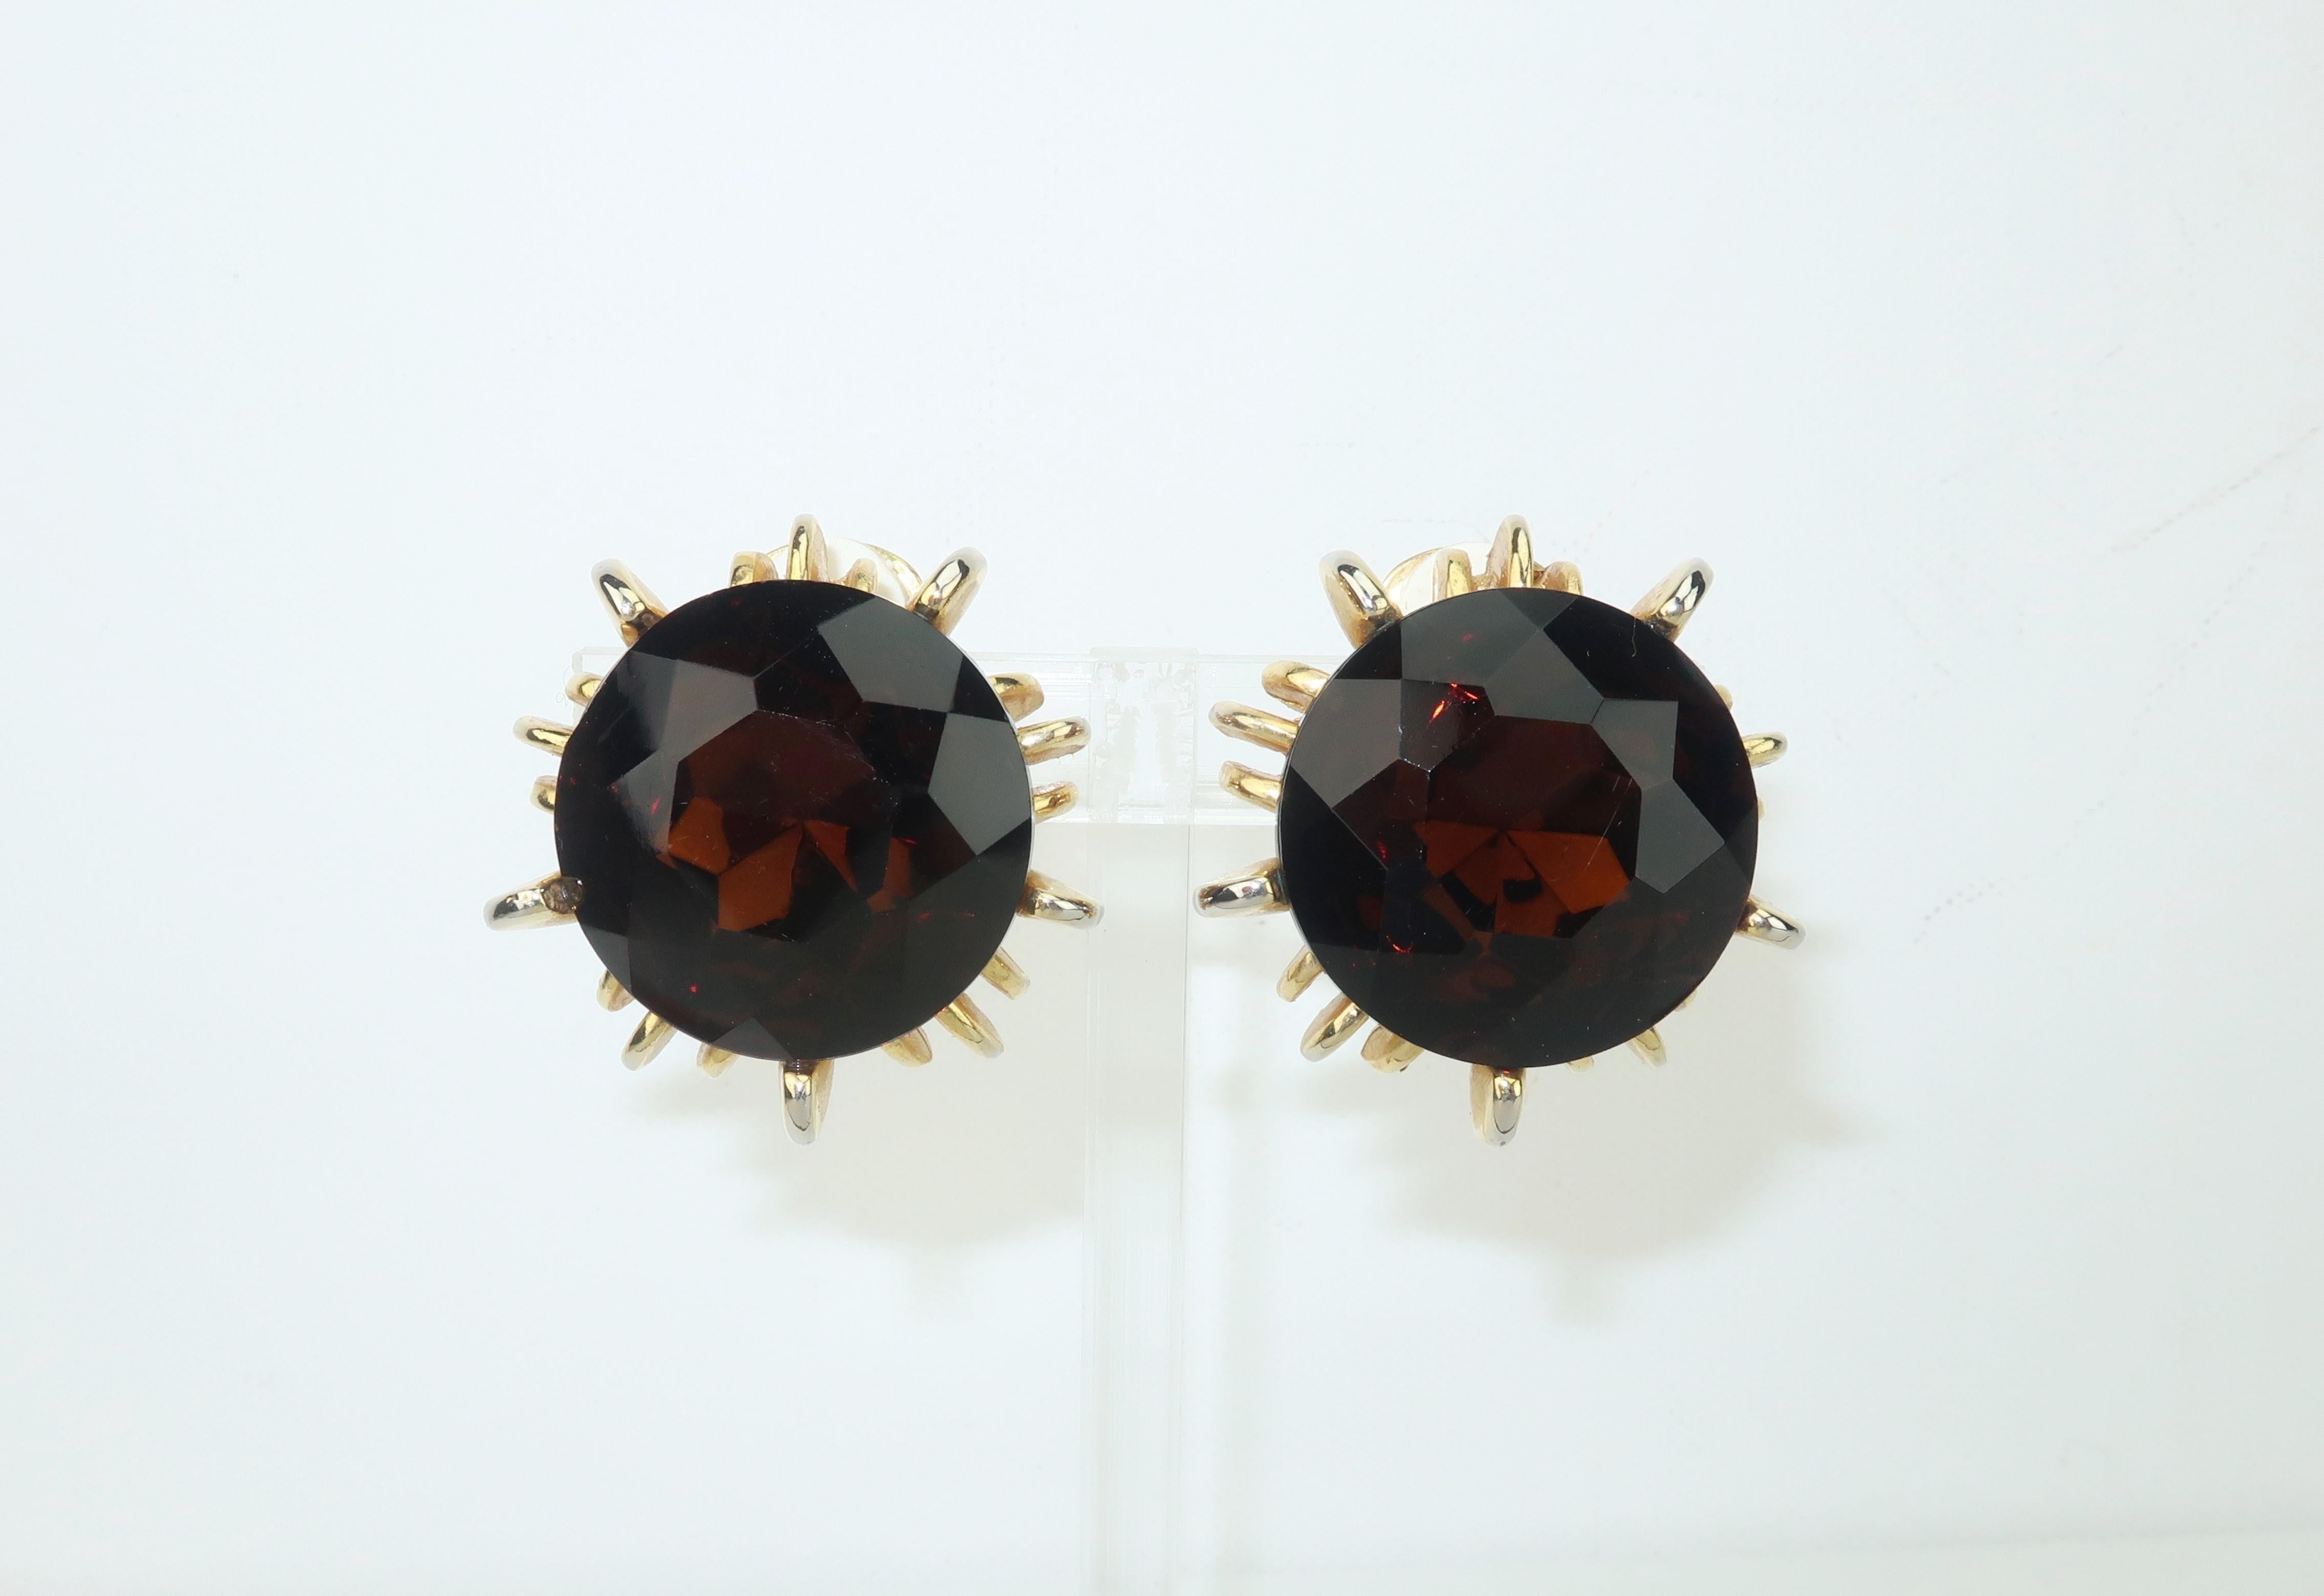 Faceted brown glass earrings with a smoky topaz look in a gold tone brutalist setting with clip on hardware.  No maker's mark though quality in style and appearance.
CONDITION
Good condition with a rough back edge to one stone as shown in photograph